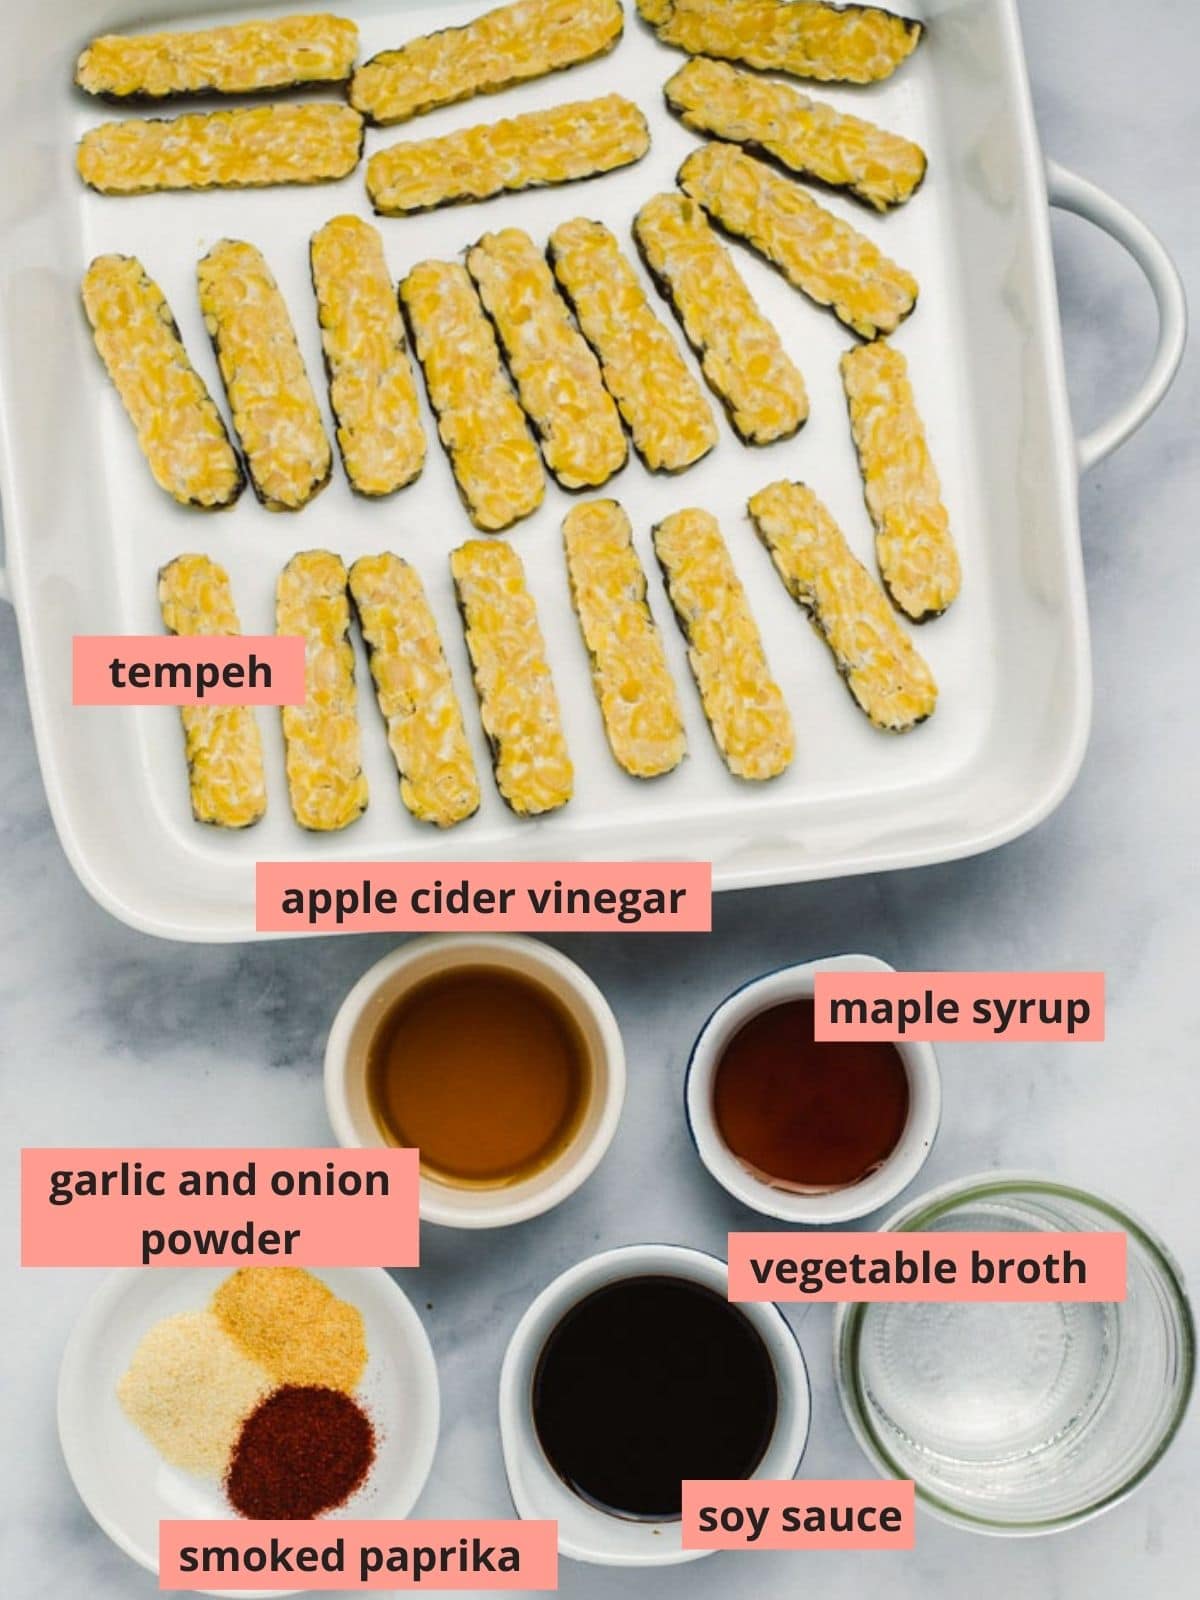 Labeled ingredients used to make tempeh bacon